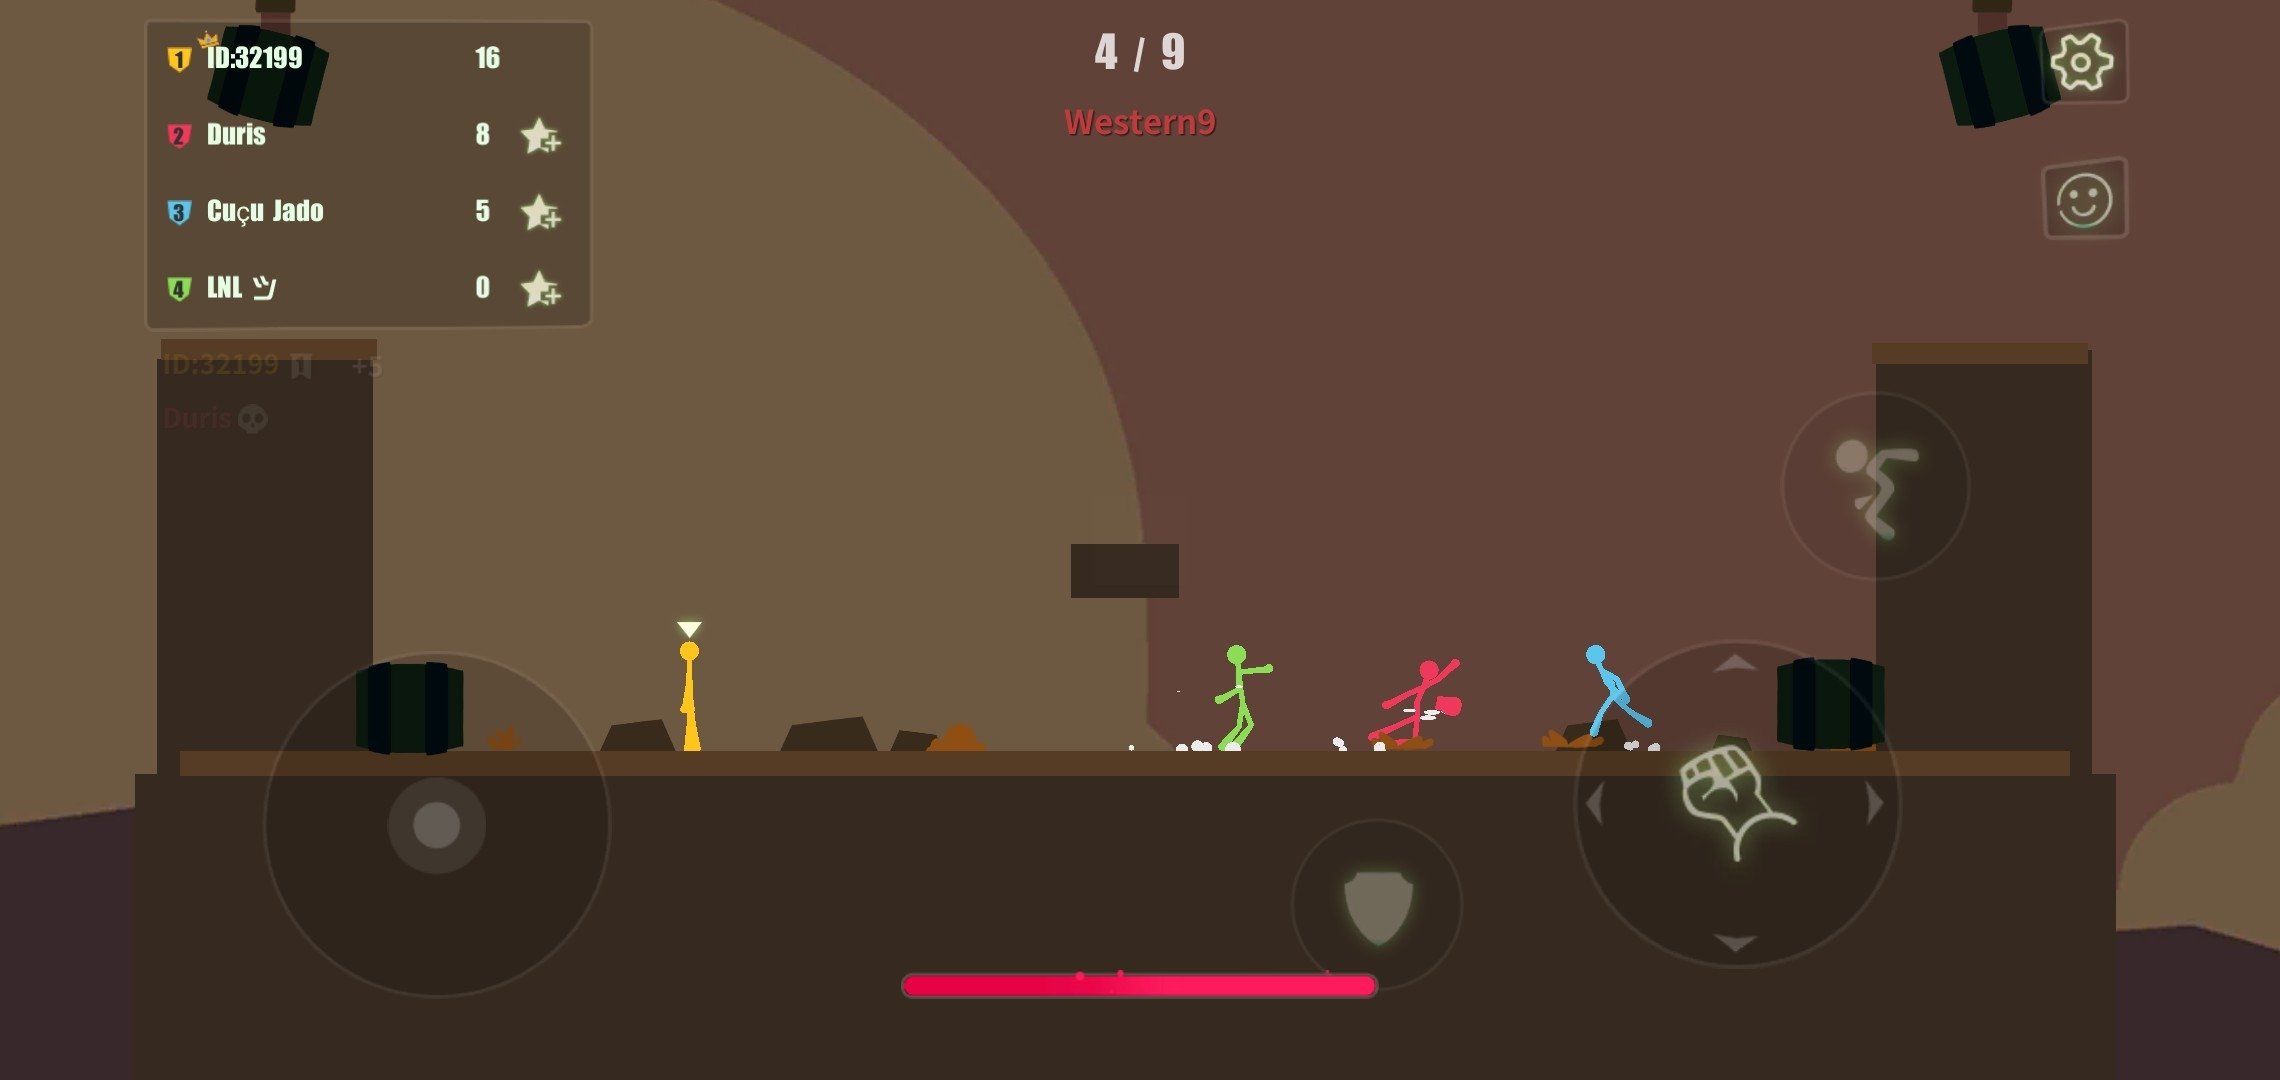 How to Download Stick Fight: The Game Mobile on Mobile